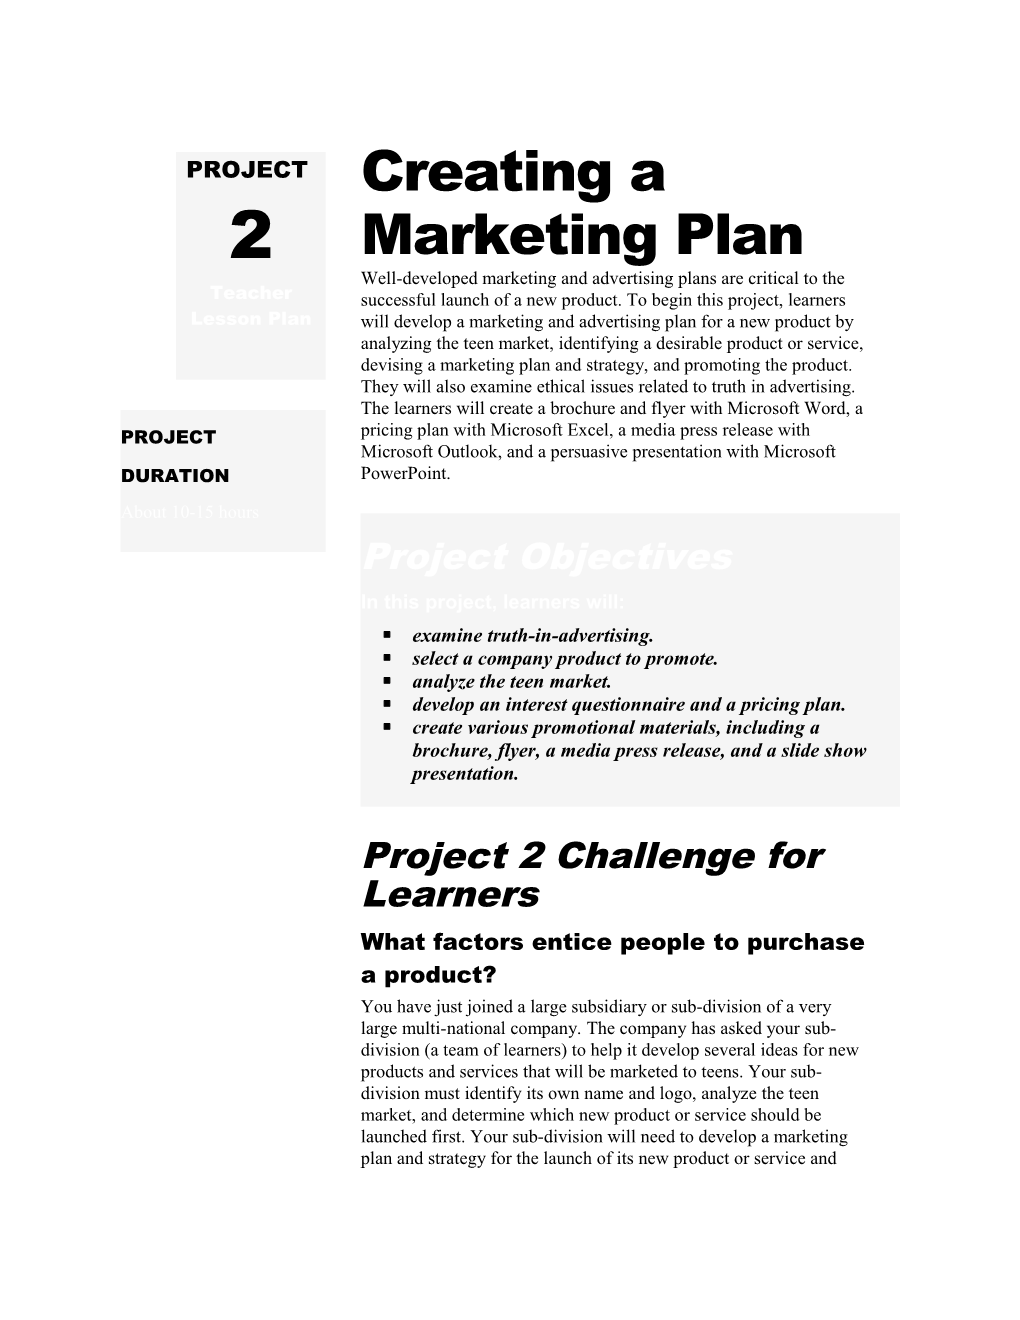 Project 2 Challenge for Learners